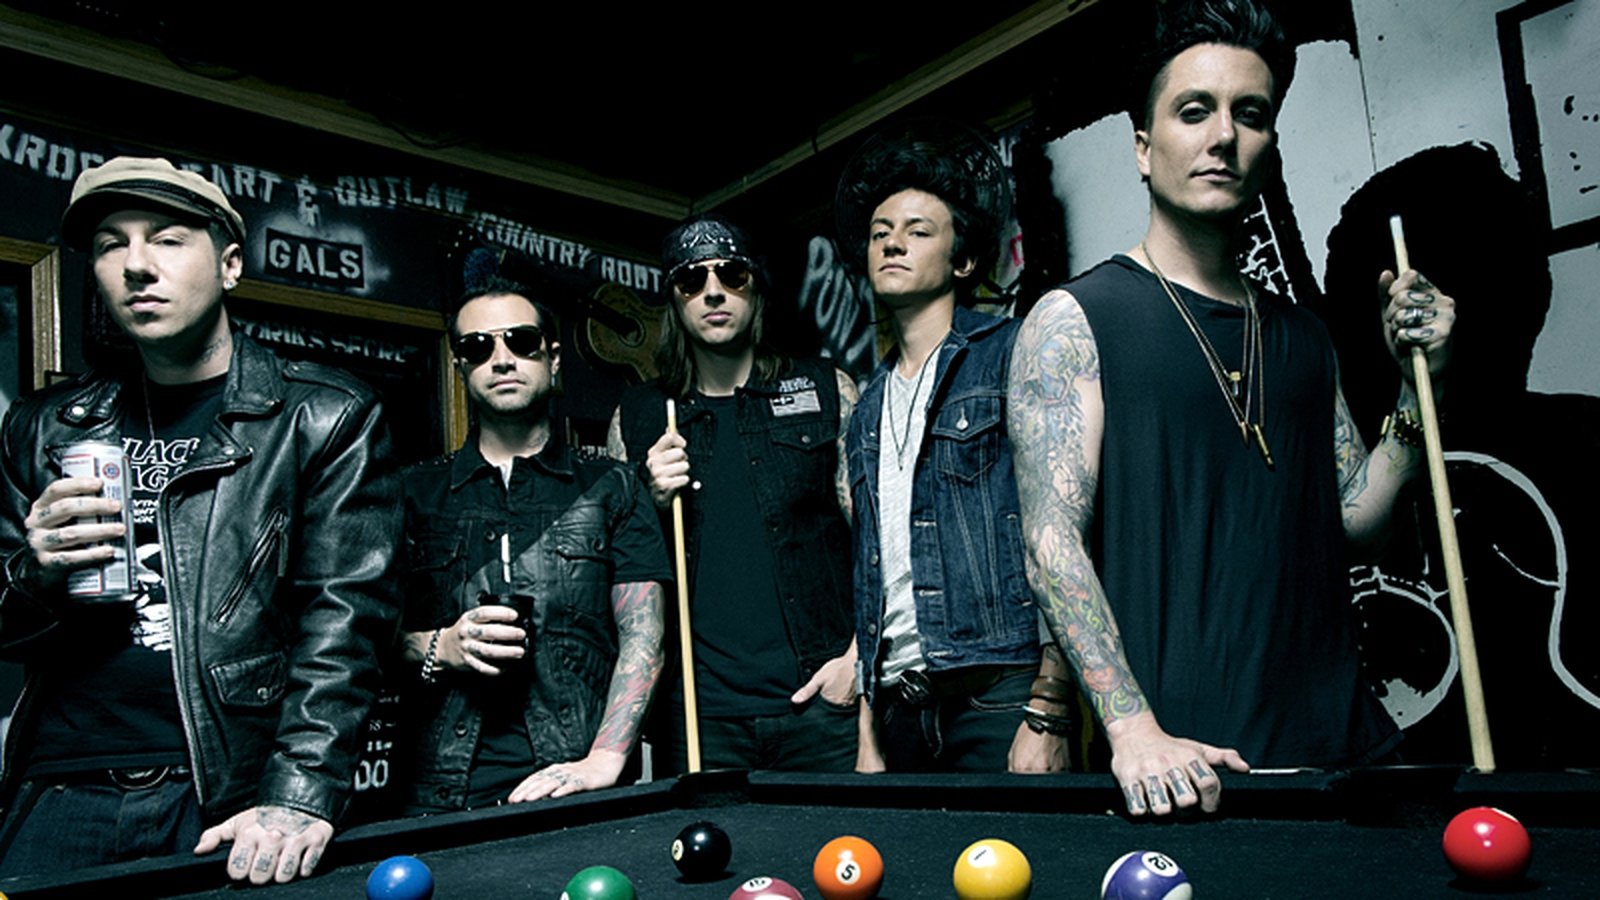 Avenged Sevenfold: Hail to the King – The Irish Times